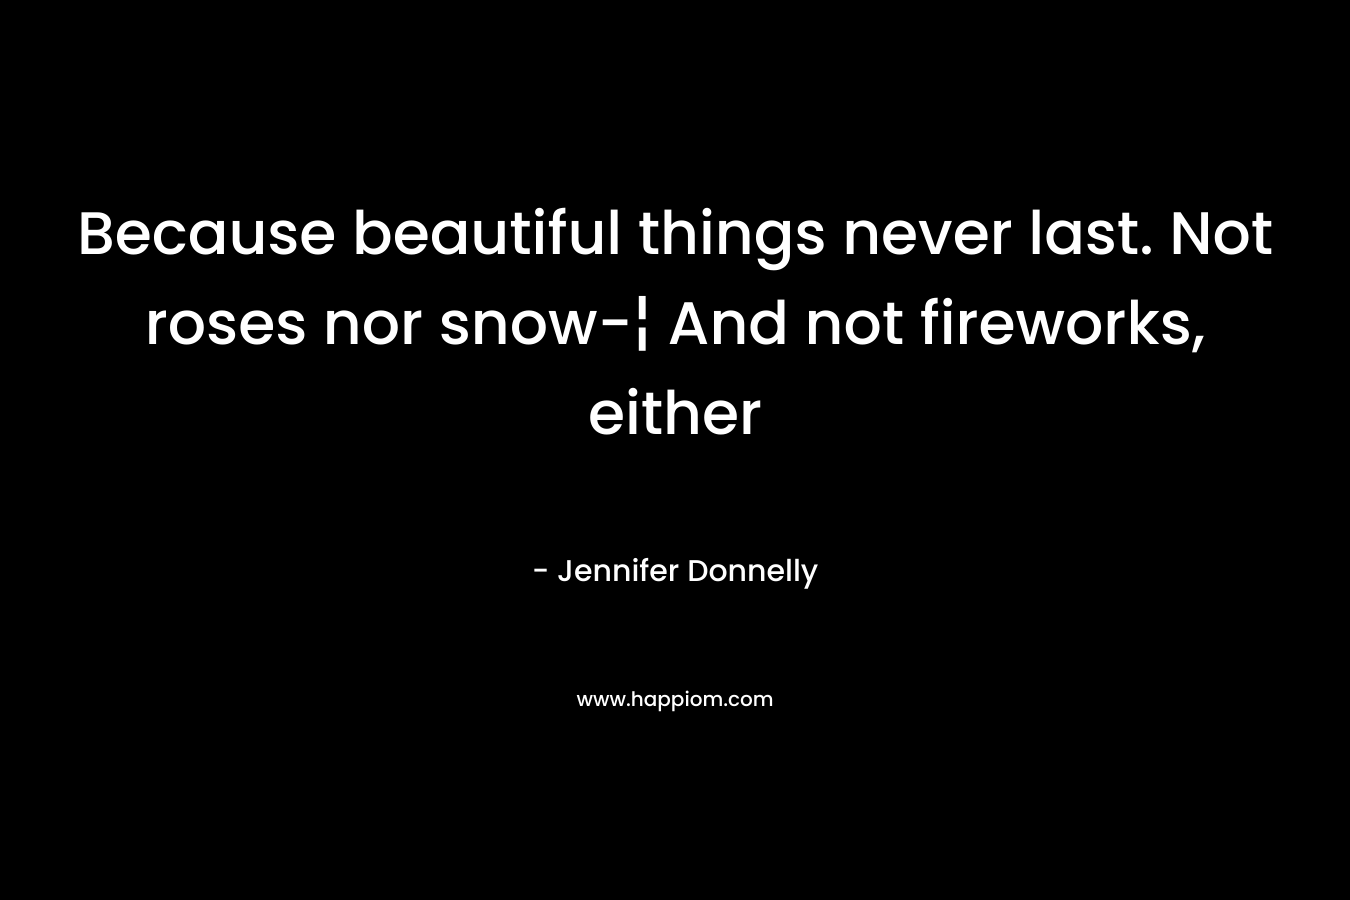 Because beautiful things never last. Not roses nor snow-¦ And not fireworks, either